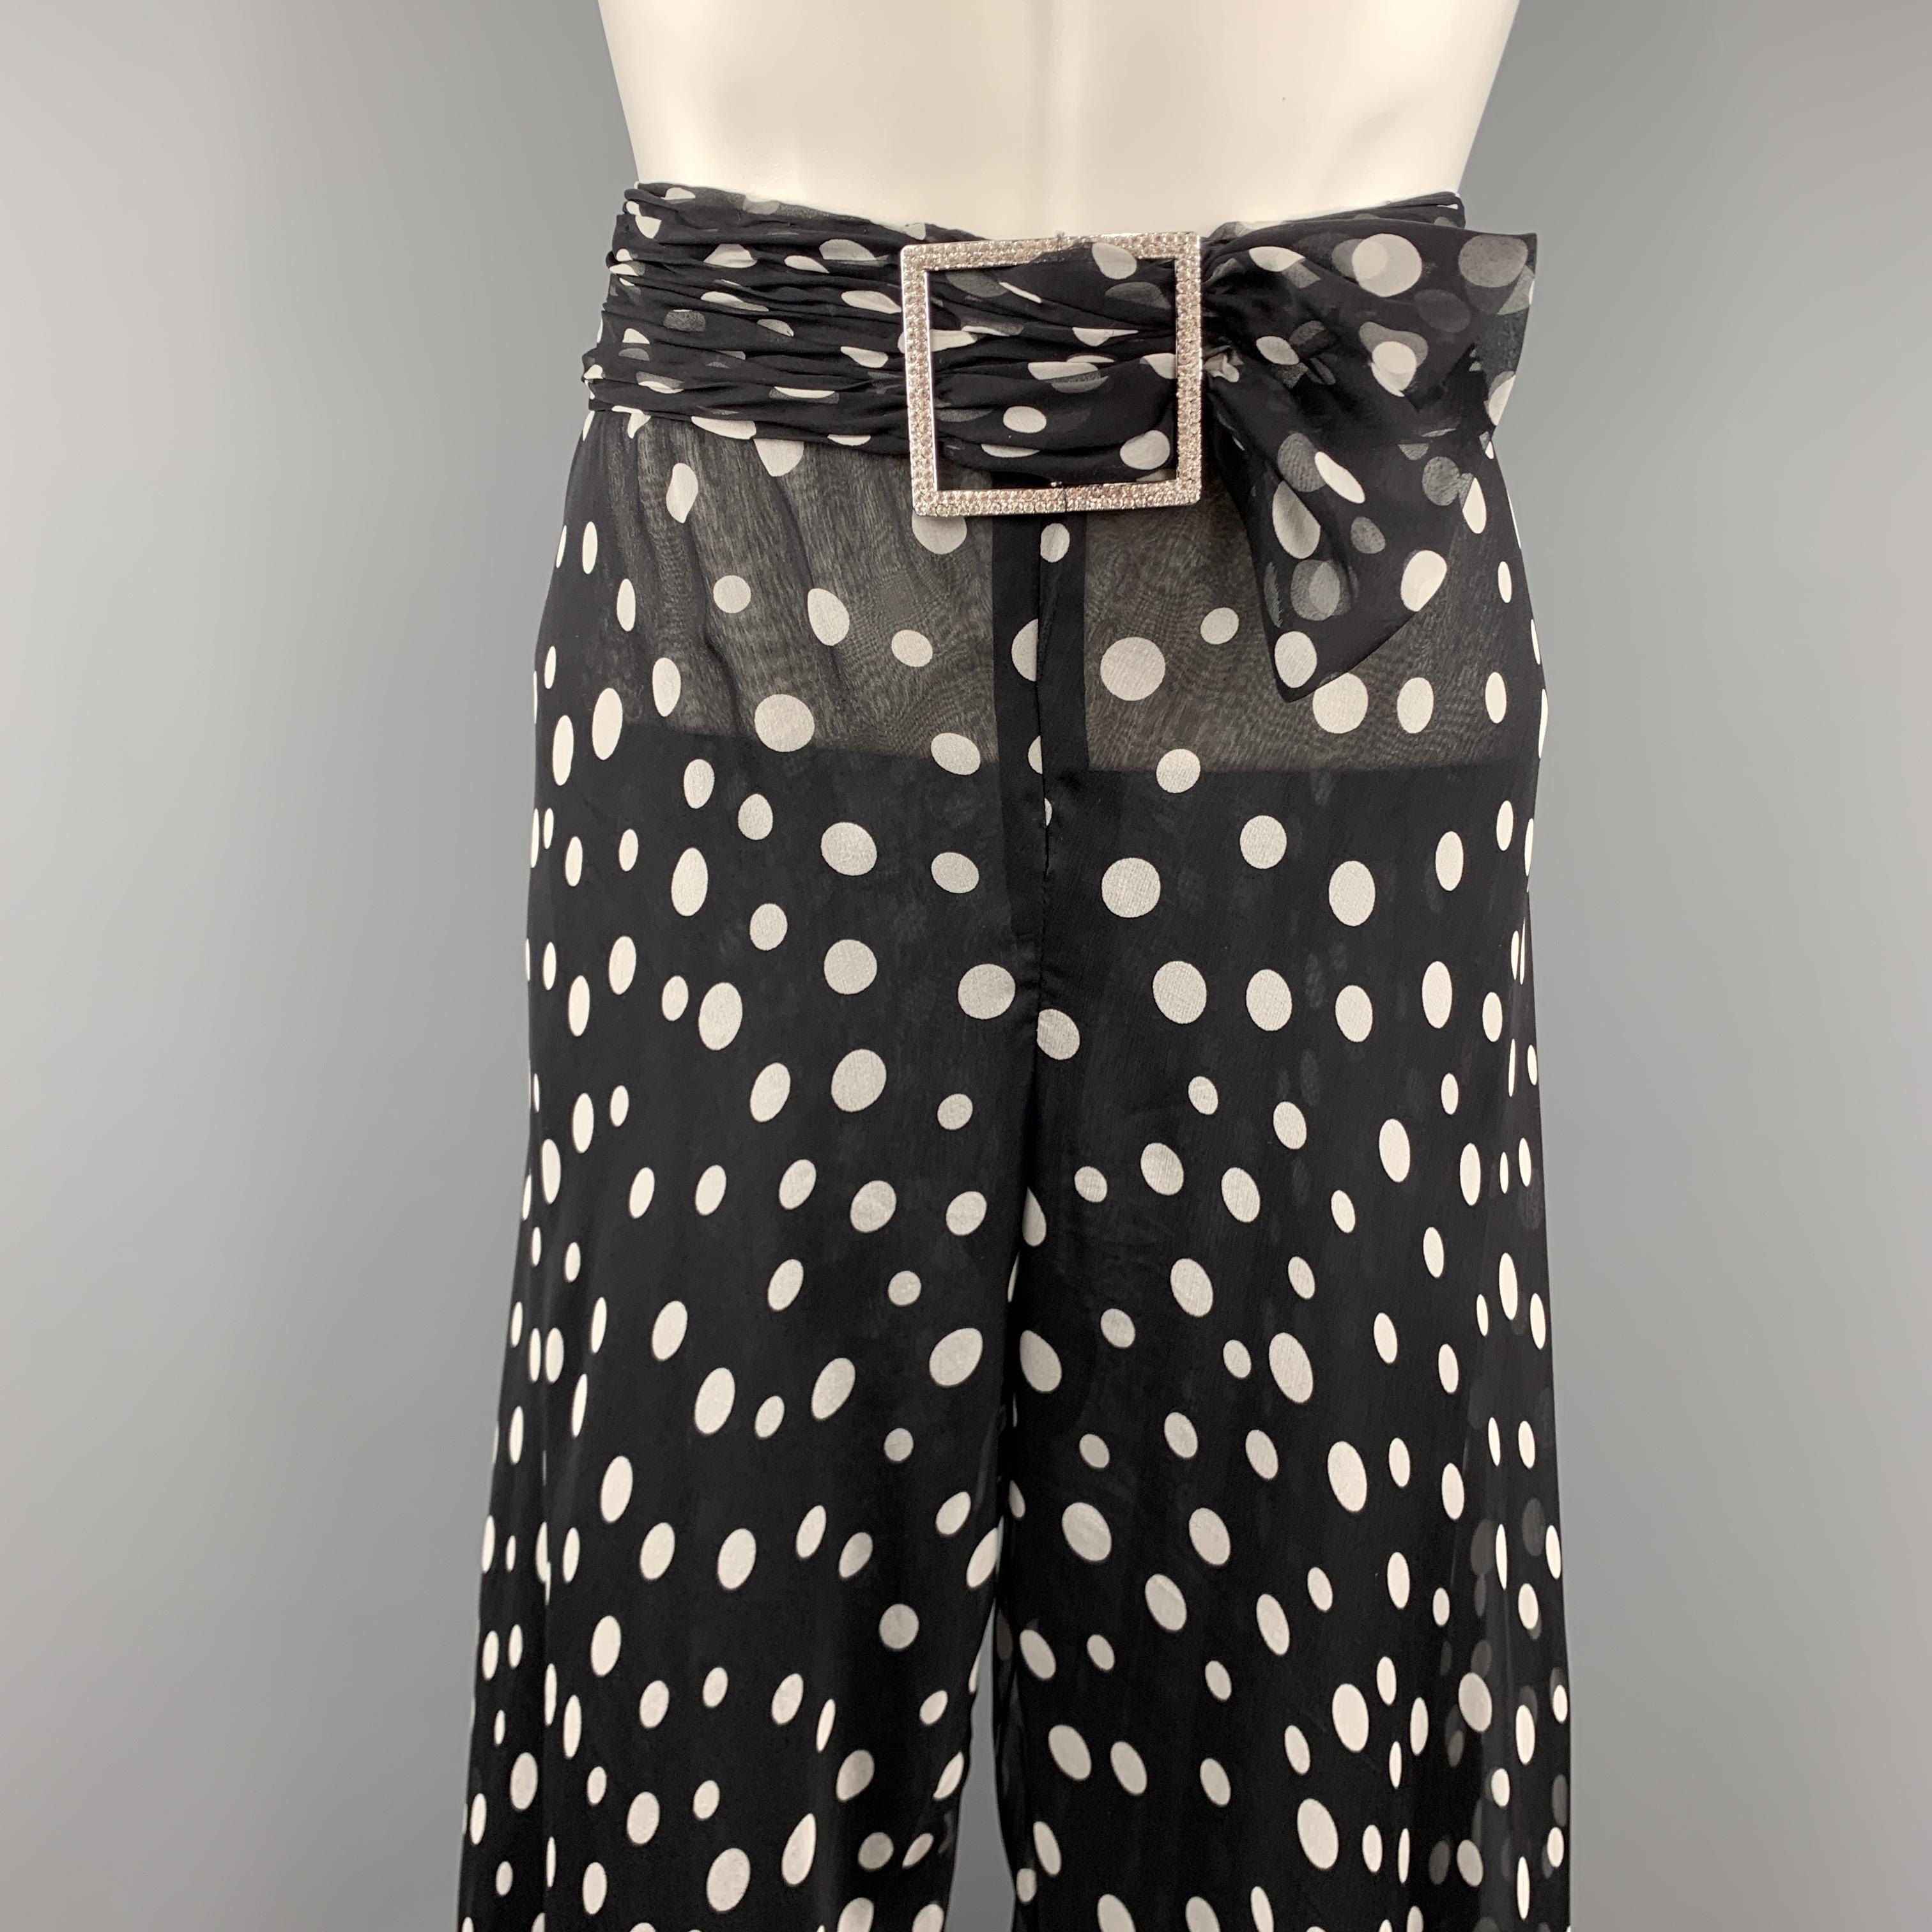 VALENTINO dress pants come in black and white polka dot sheer chiffon with wide ruffled hem legs, gathered waistband with silver tone rhinestone buckle, and black chiffon liner. Made in Italy.

Excellent Pre-Owned Condition.
Marked: (no